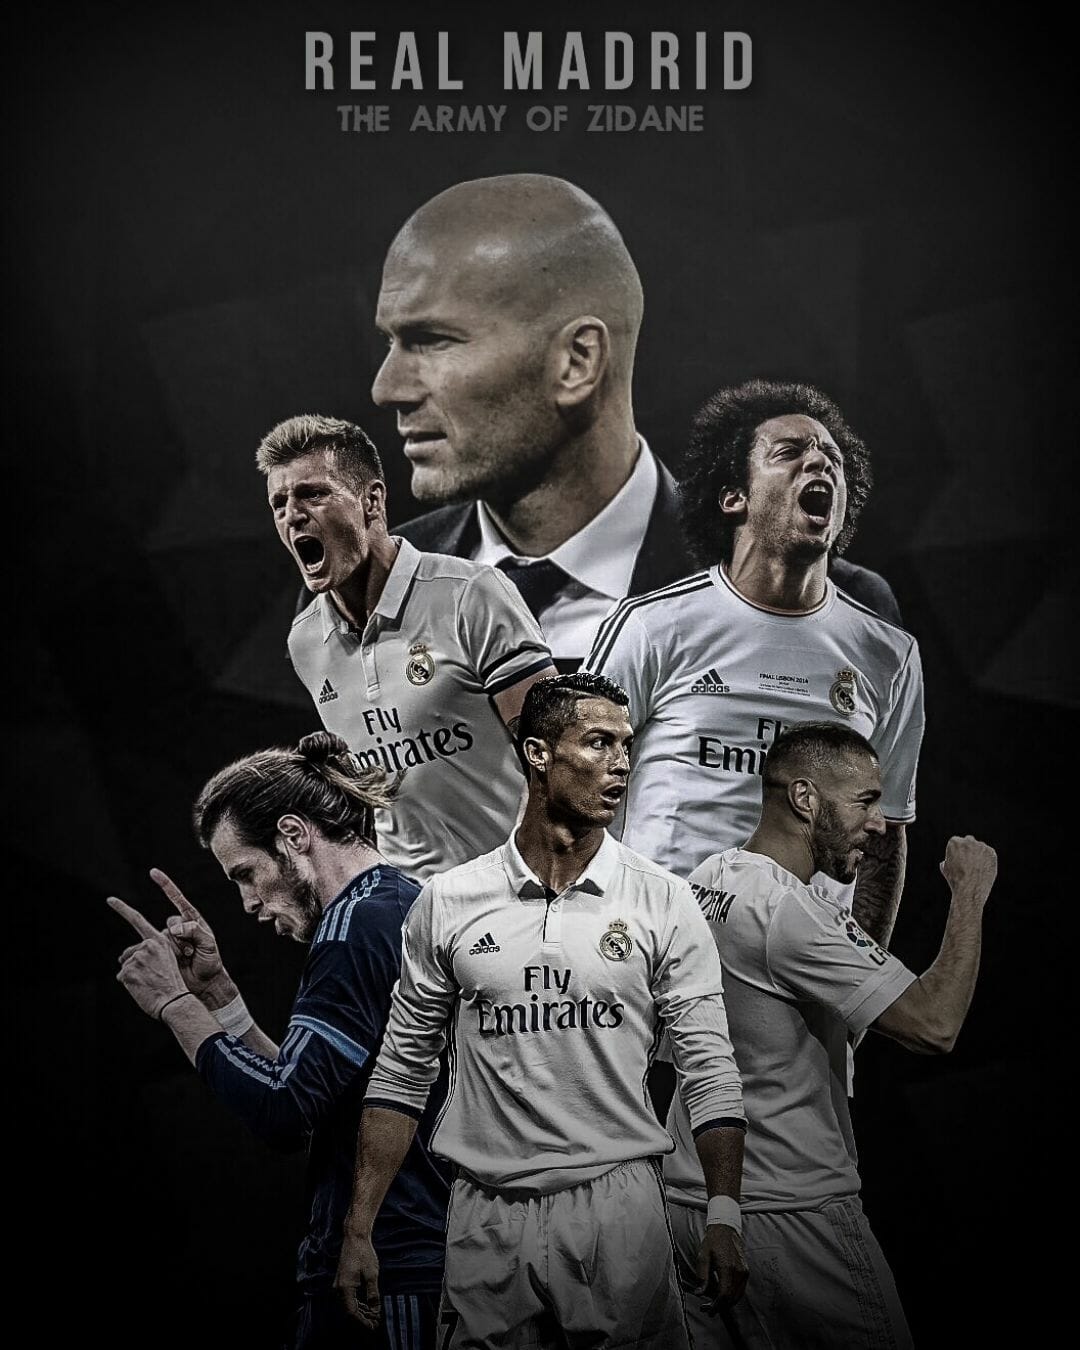 Real Madrid Hintergrundbild 1080x1350. Free download [1655] REAL MADRID WALLPAPER Android iPhone HD Wallpaper [1080x1350] for your Desktop, Mobile & Tablet. Explore Real Madrid 2022 Wallpaper. Real Madrid Background, Real Madrid Wallpaper, Real Madrid Fc Wallpaper